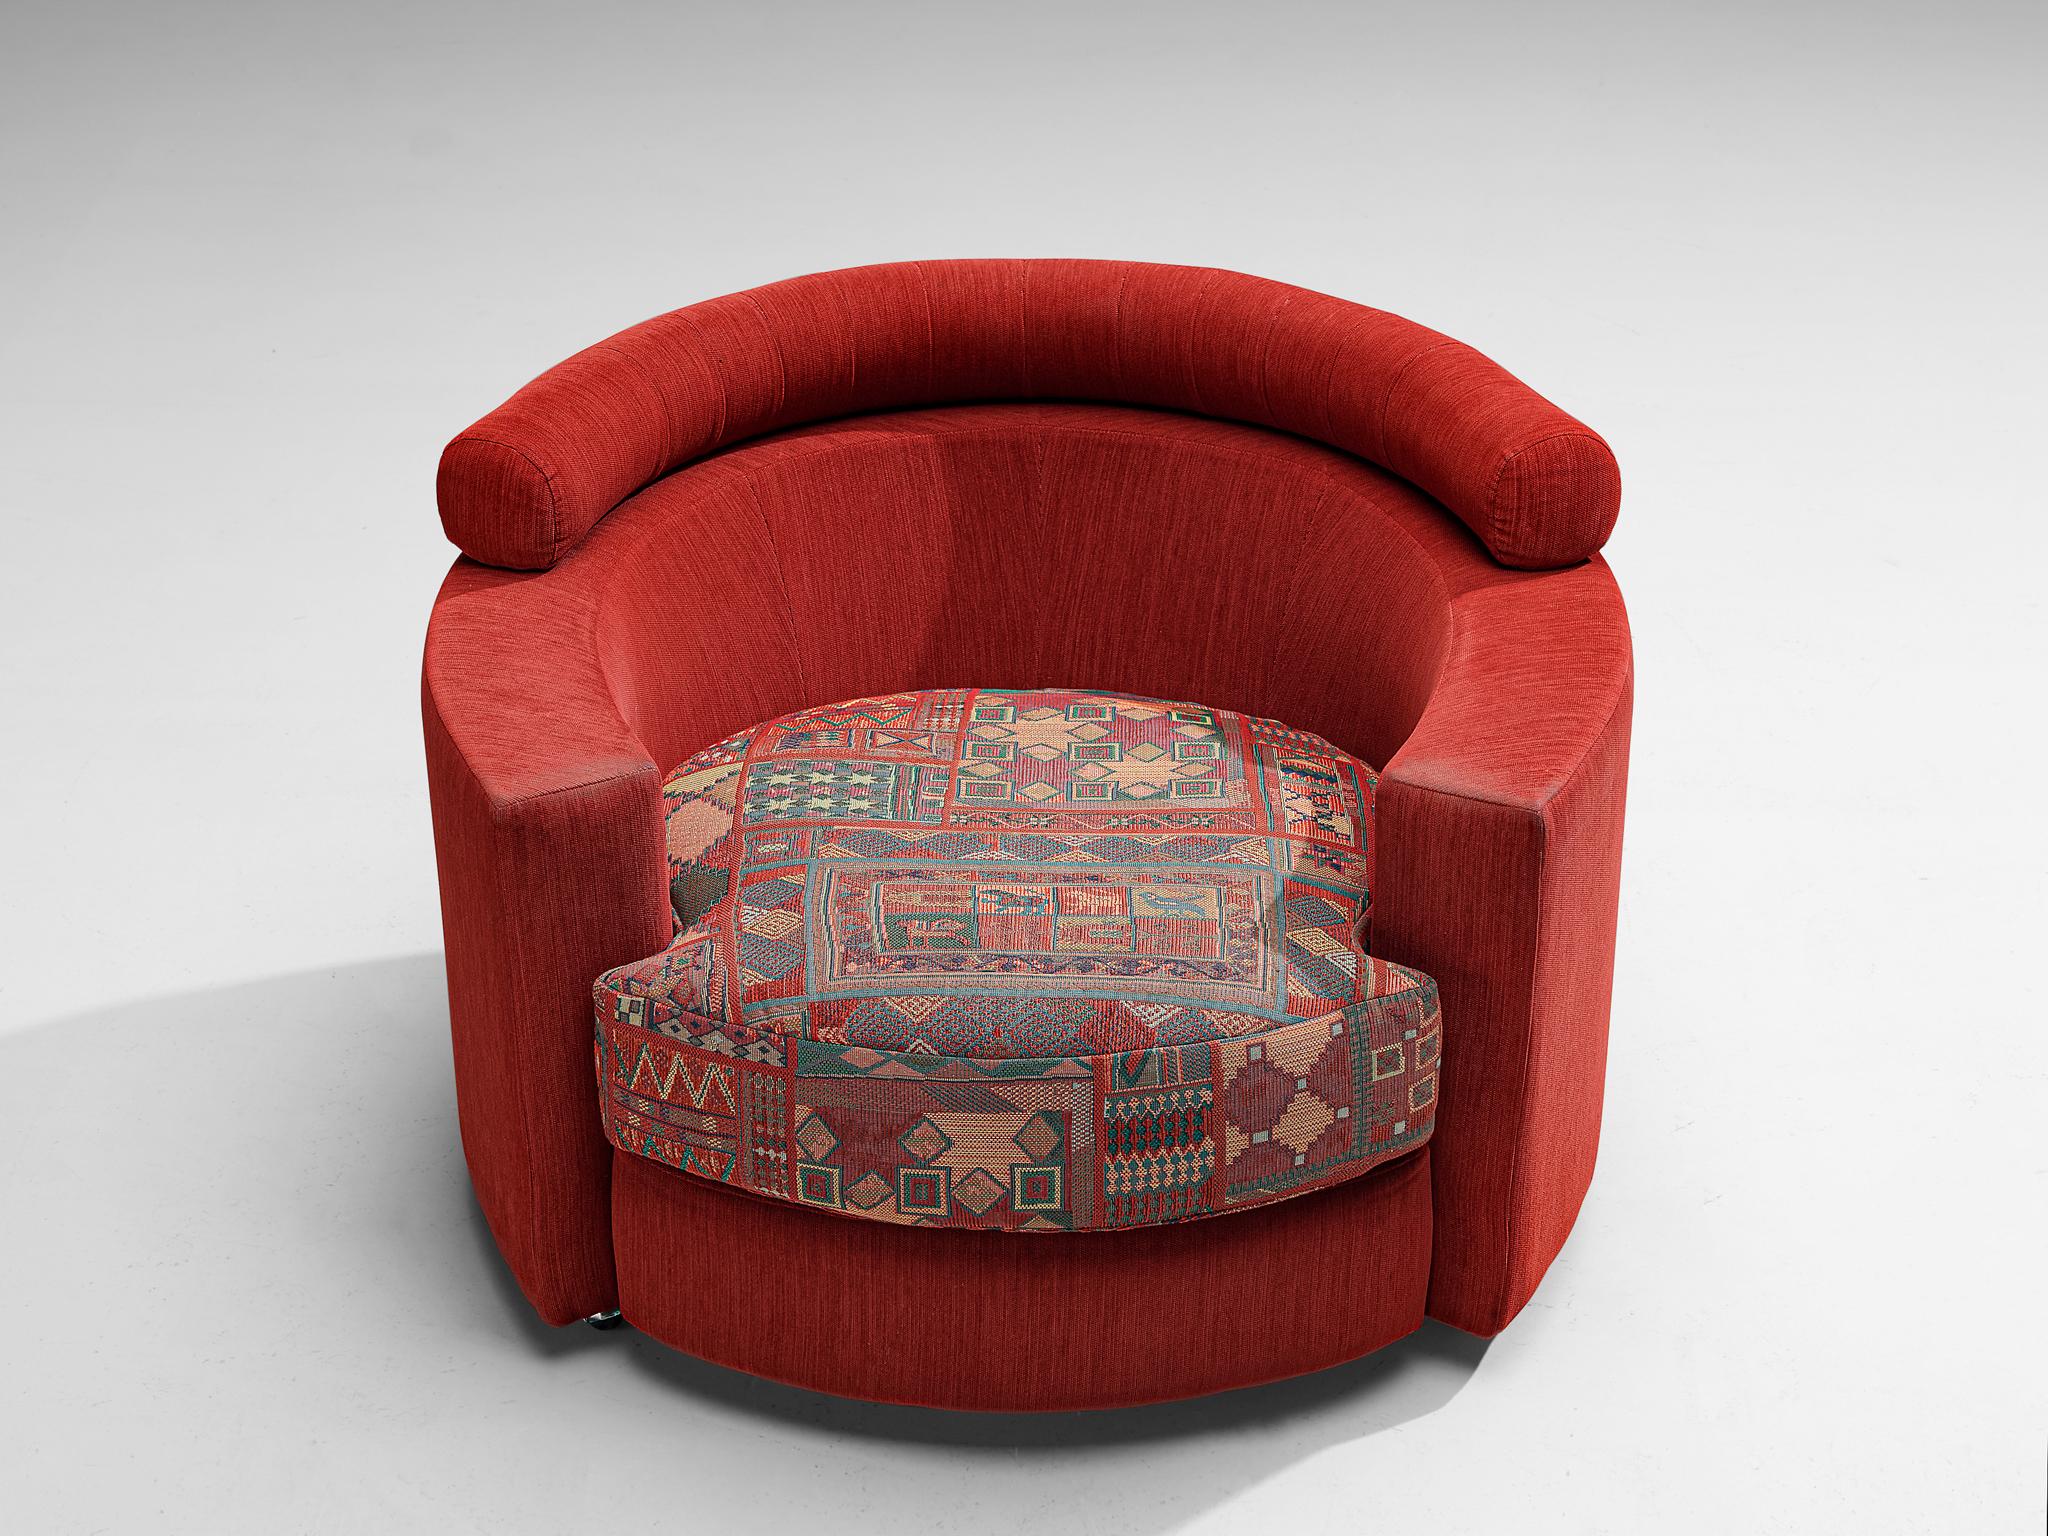 Roche Bobois Pair of Lounge Chairs in Red and Patterned Upholstery For Sale 2